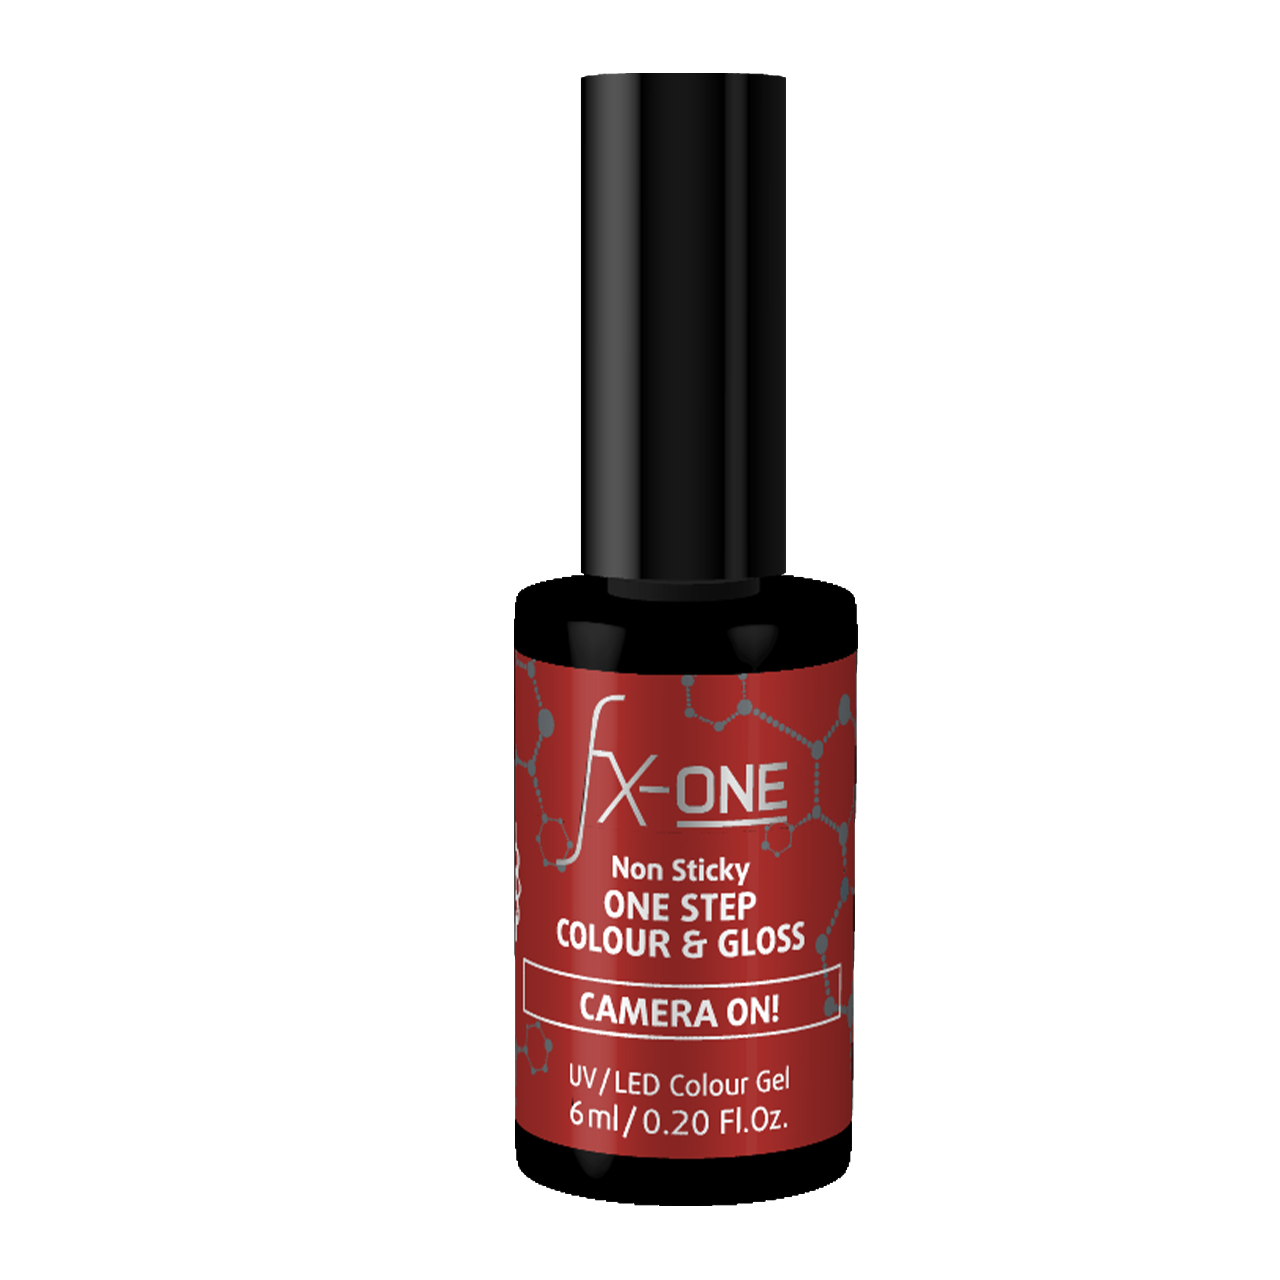 FX-ONE Colour & Gloss Camera On! 6 ml